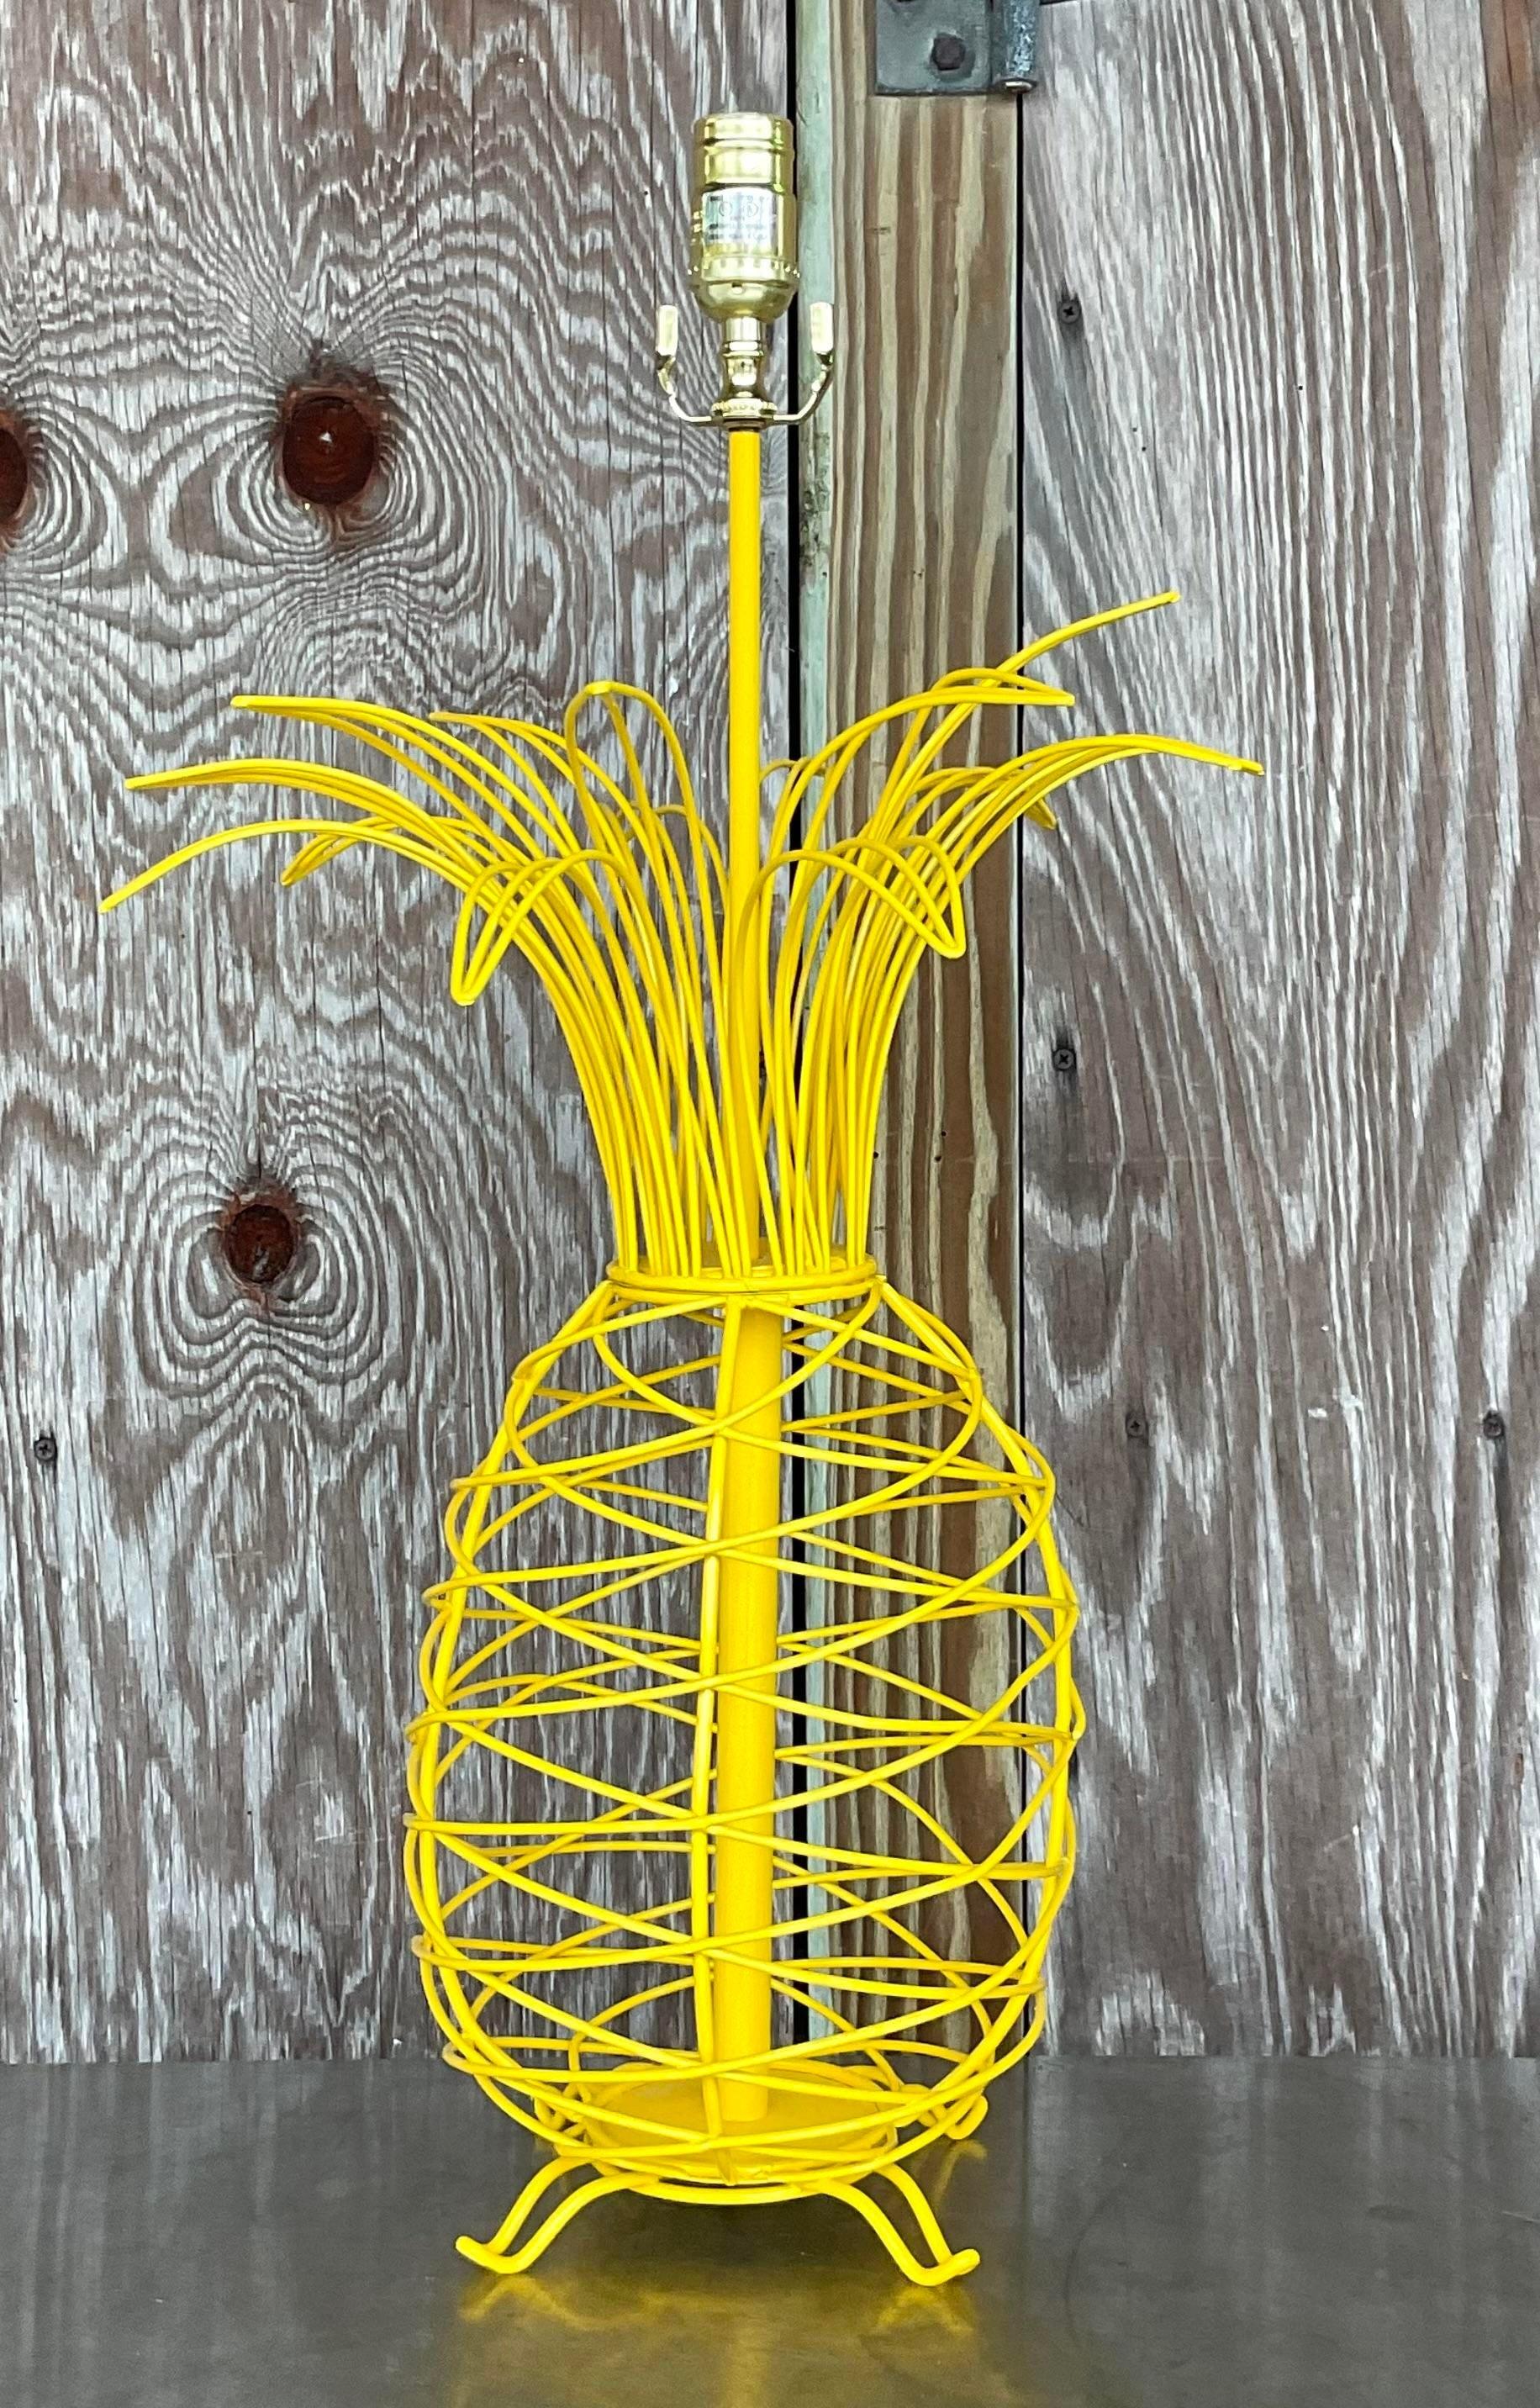 A fabulous vintage Coastal table lamp. A chic wire frame pineapple in a gorgeous juicy yellow color. Perfect to add a little tropical flash to any space. Acquired from a Palm Beach estate.